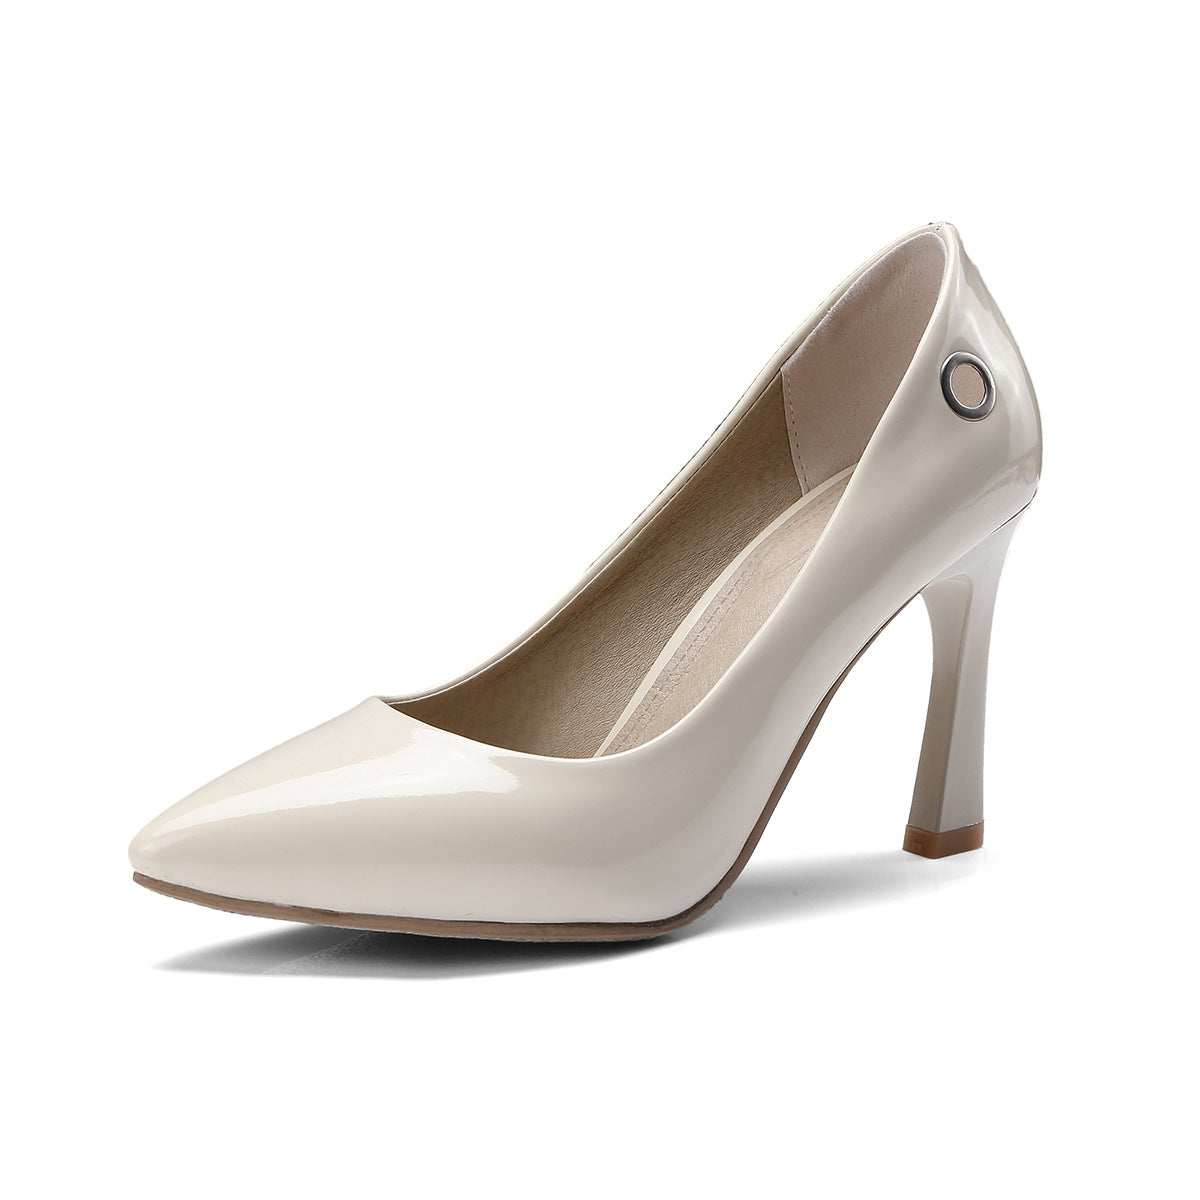 Women's Pointed Ankle Straps Bride High Heel Pumps